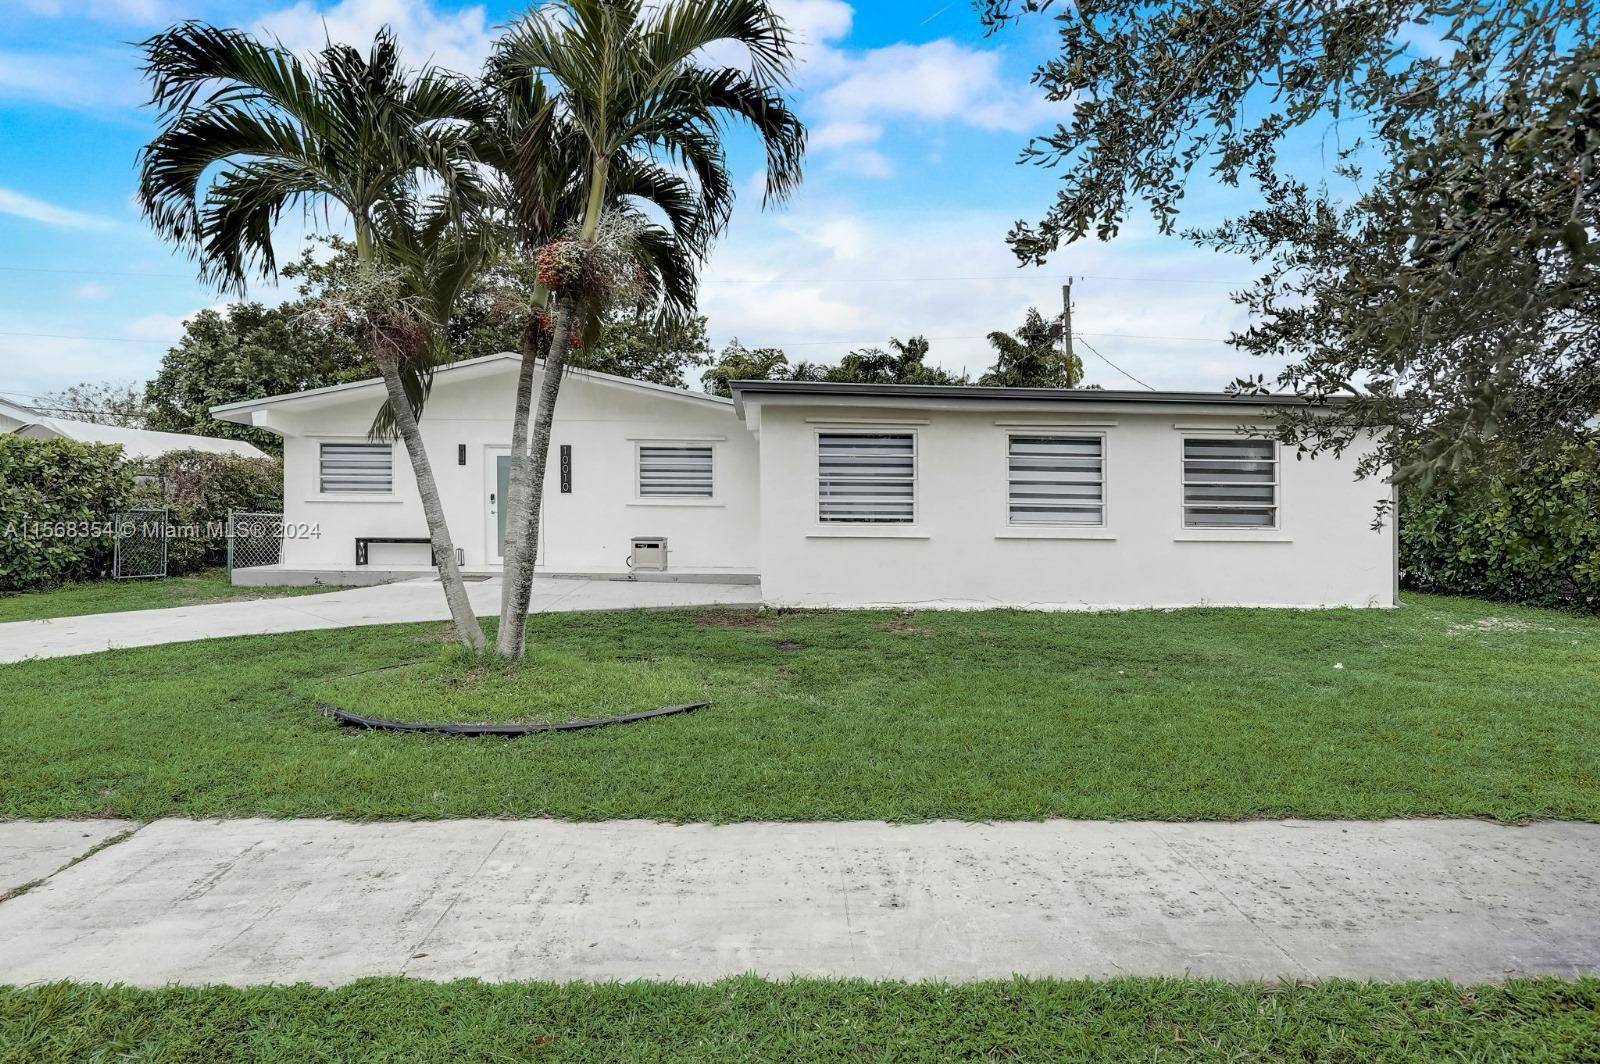 BEUTIFUL, BEUTIFUL, LOCATION SELLER MOTIVATED, RV Included Property completely remodeled in one the most spectacular areas of Cutler Bay close to the Turnpike and Southland Mall, Beautiful pool and terrace ...